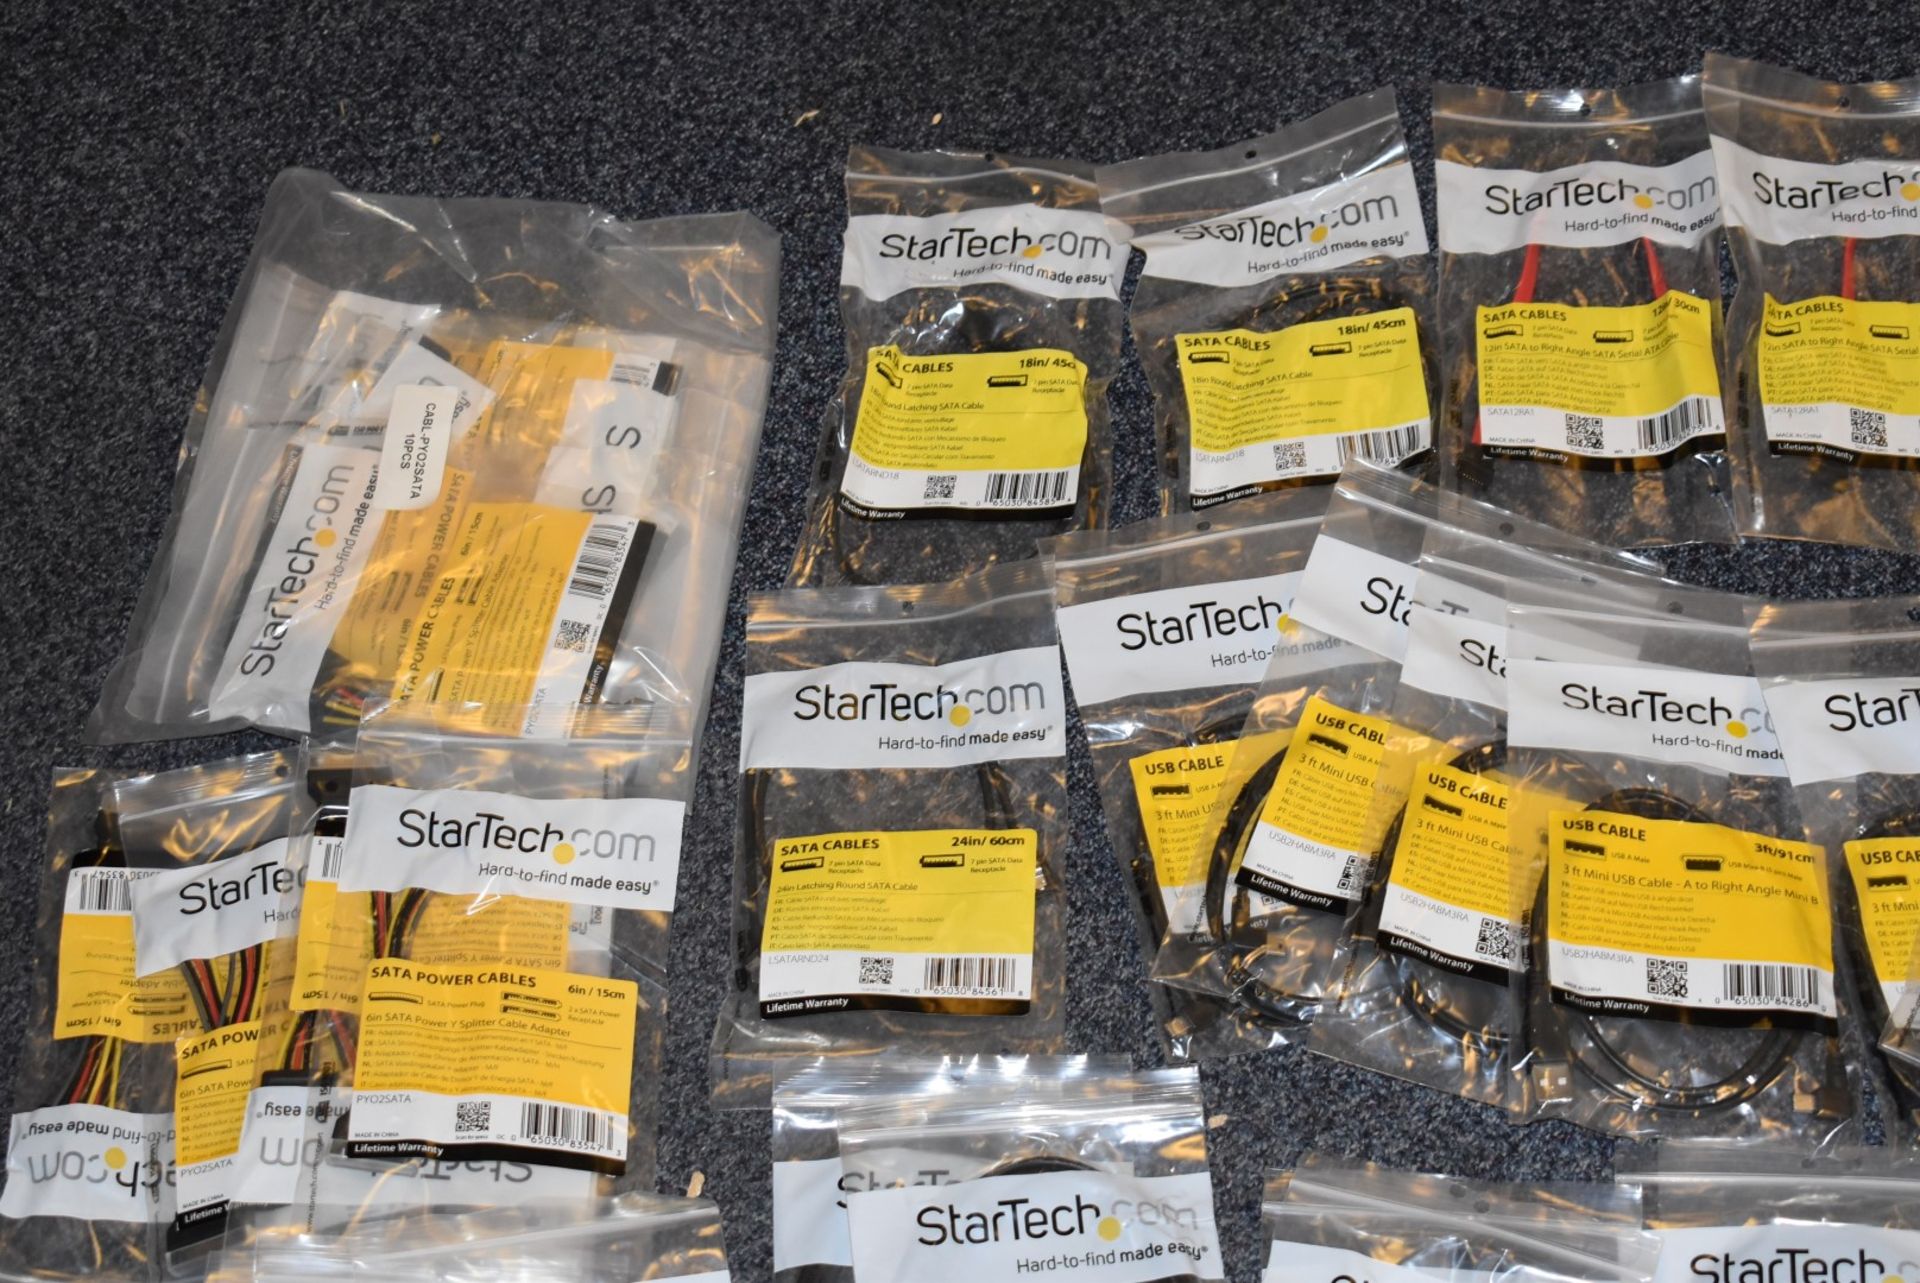 177 x Assorted StarTech Cables - Huge Lot in Original Packing - Various Cables Included - Image 38 of 50